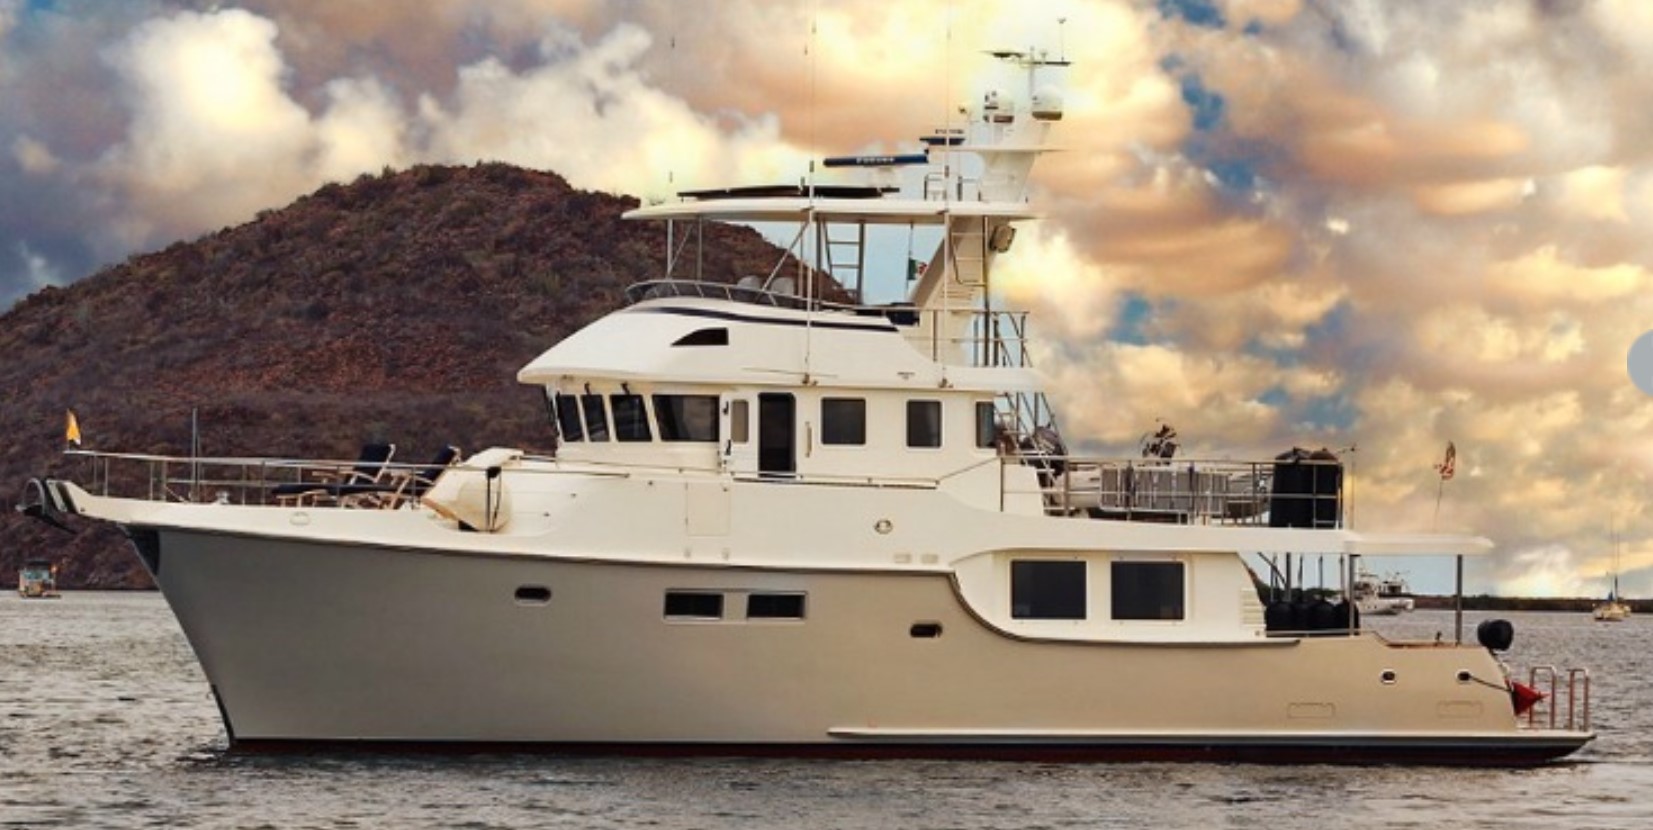 NW Explorations Adds 60’ Nordhavn to its Fleet boat